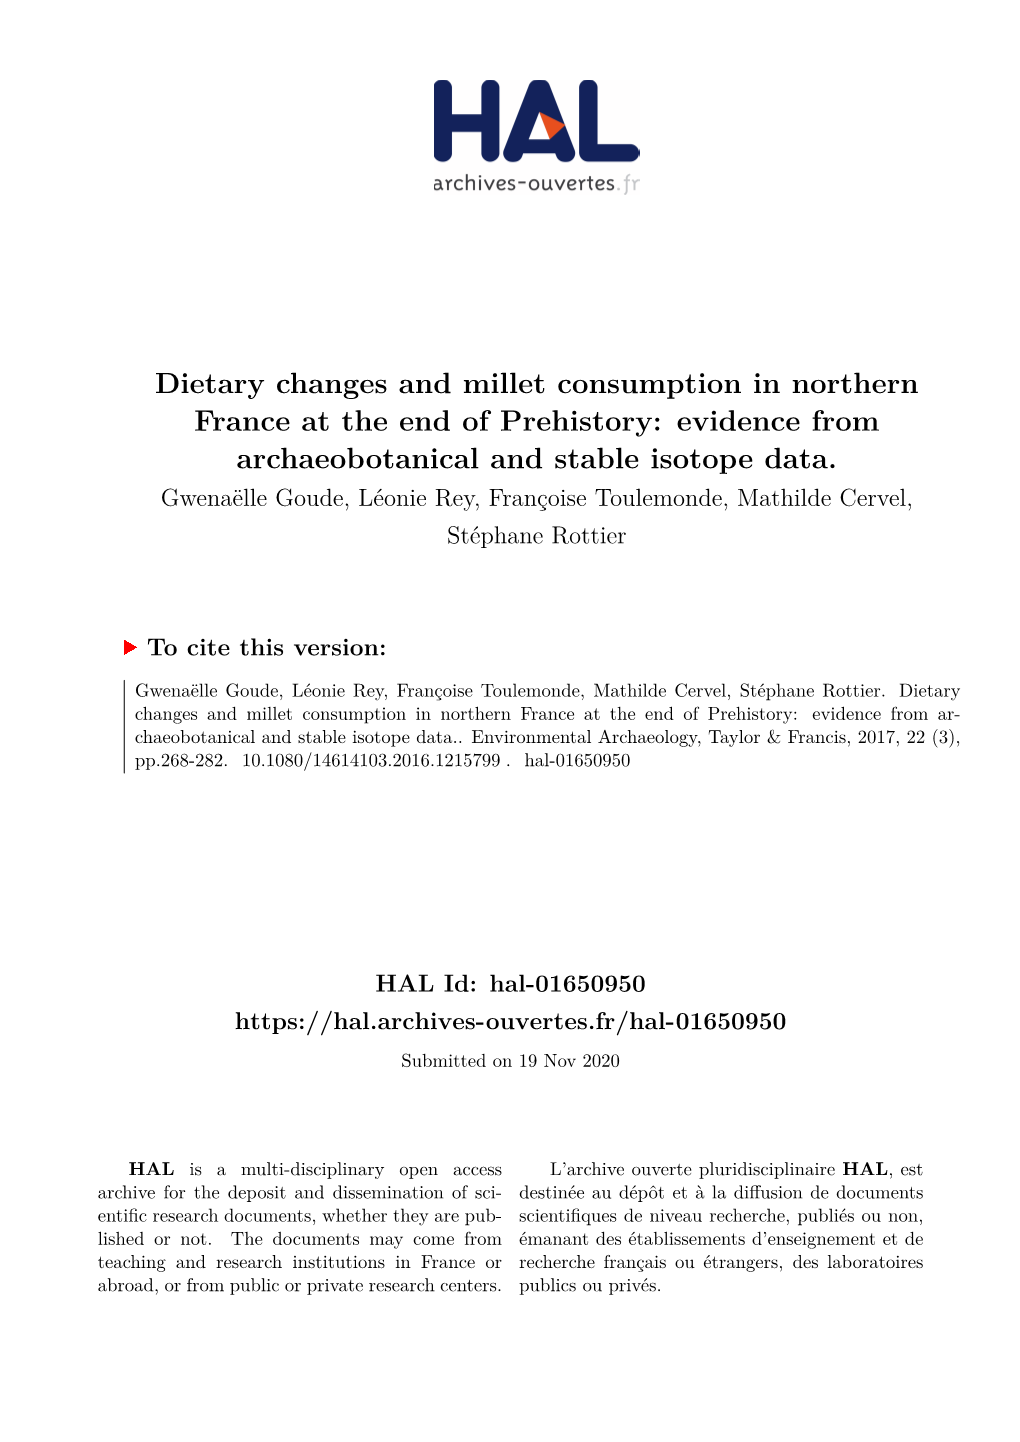 Dietary Changes and Millet Consumption in Northern France at the End of Prehistory: Evidence from Archaeobotanical and Stable Isotope Data